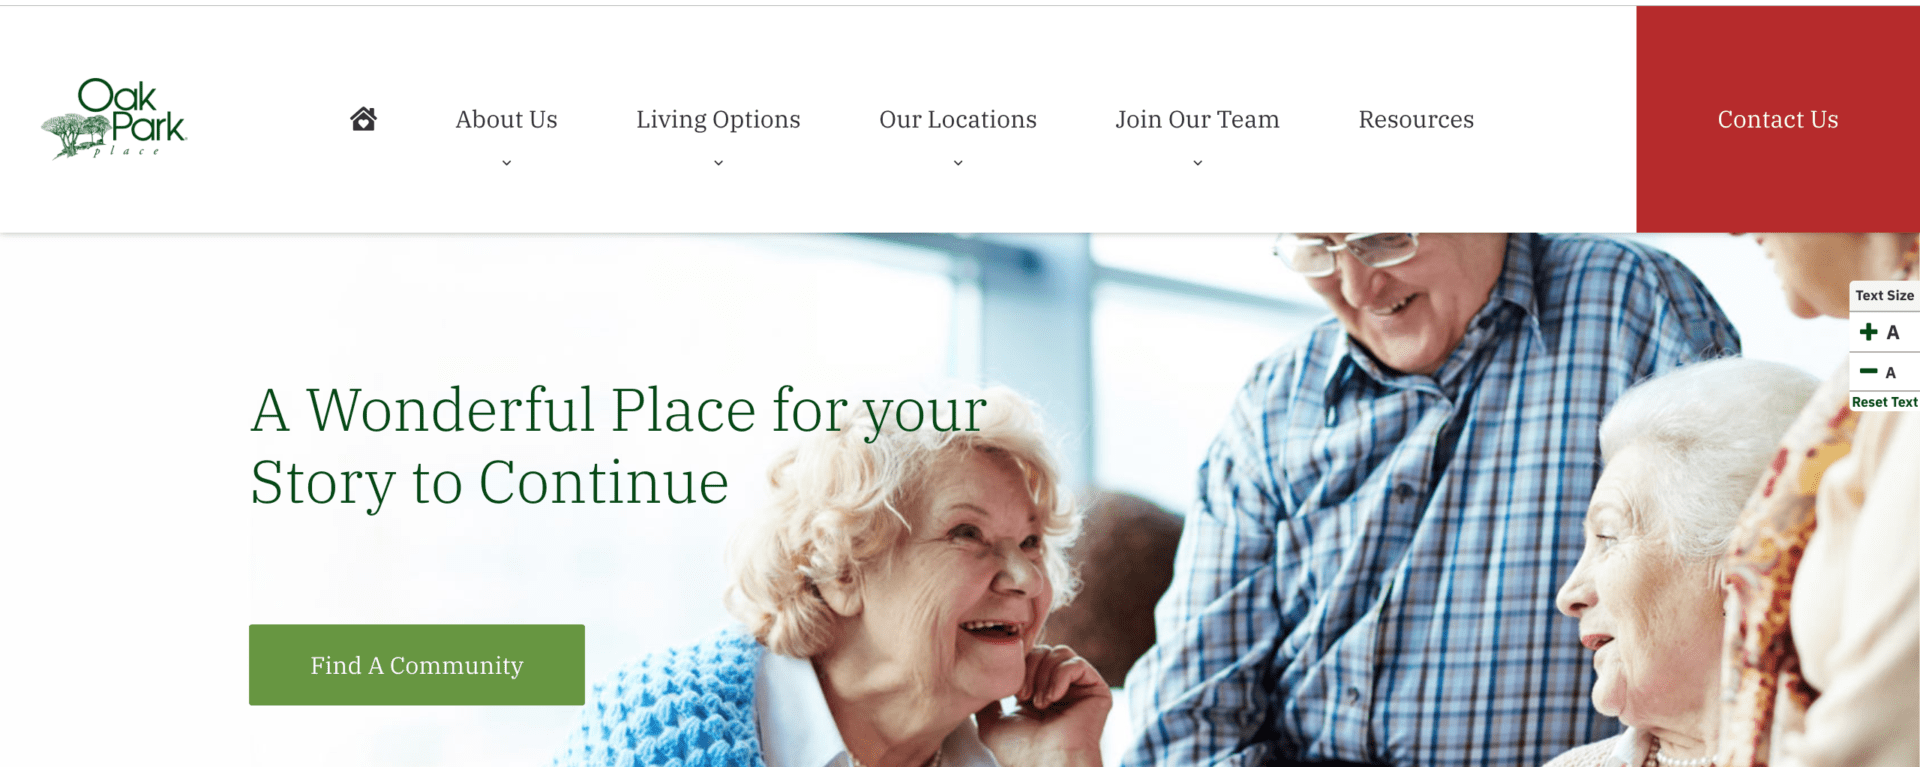 Example of a simple website menu using language a senior living center's audience understands.